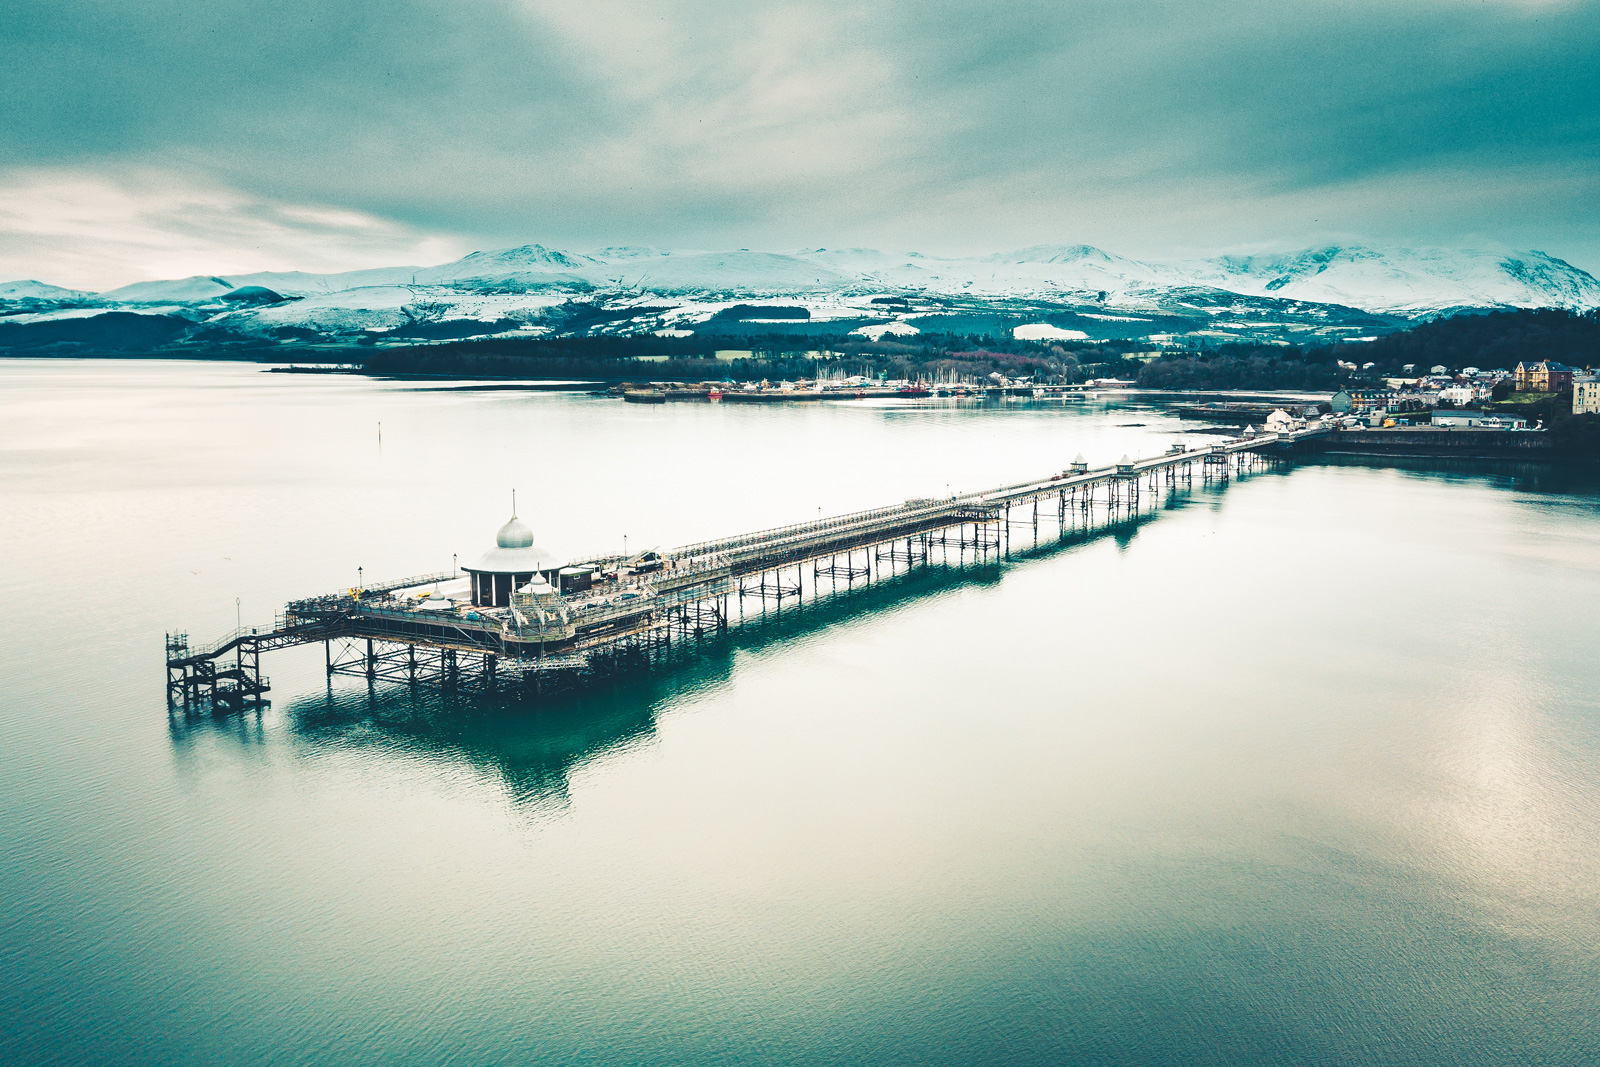 An aireal view of the Bangor pier.